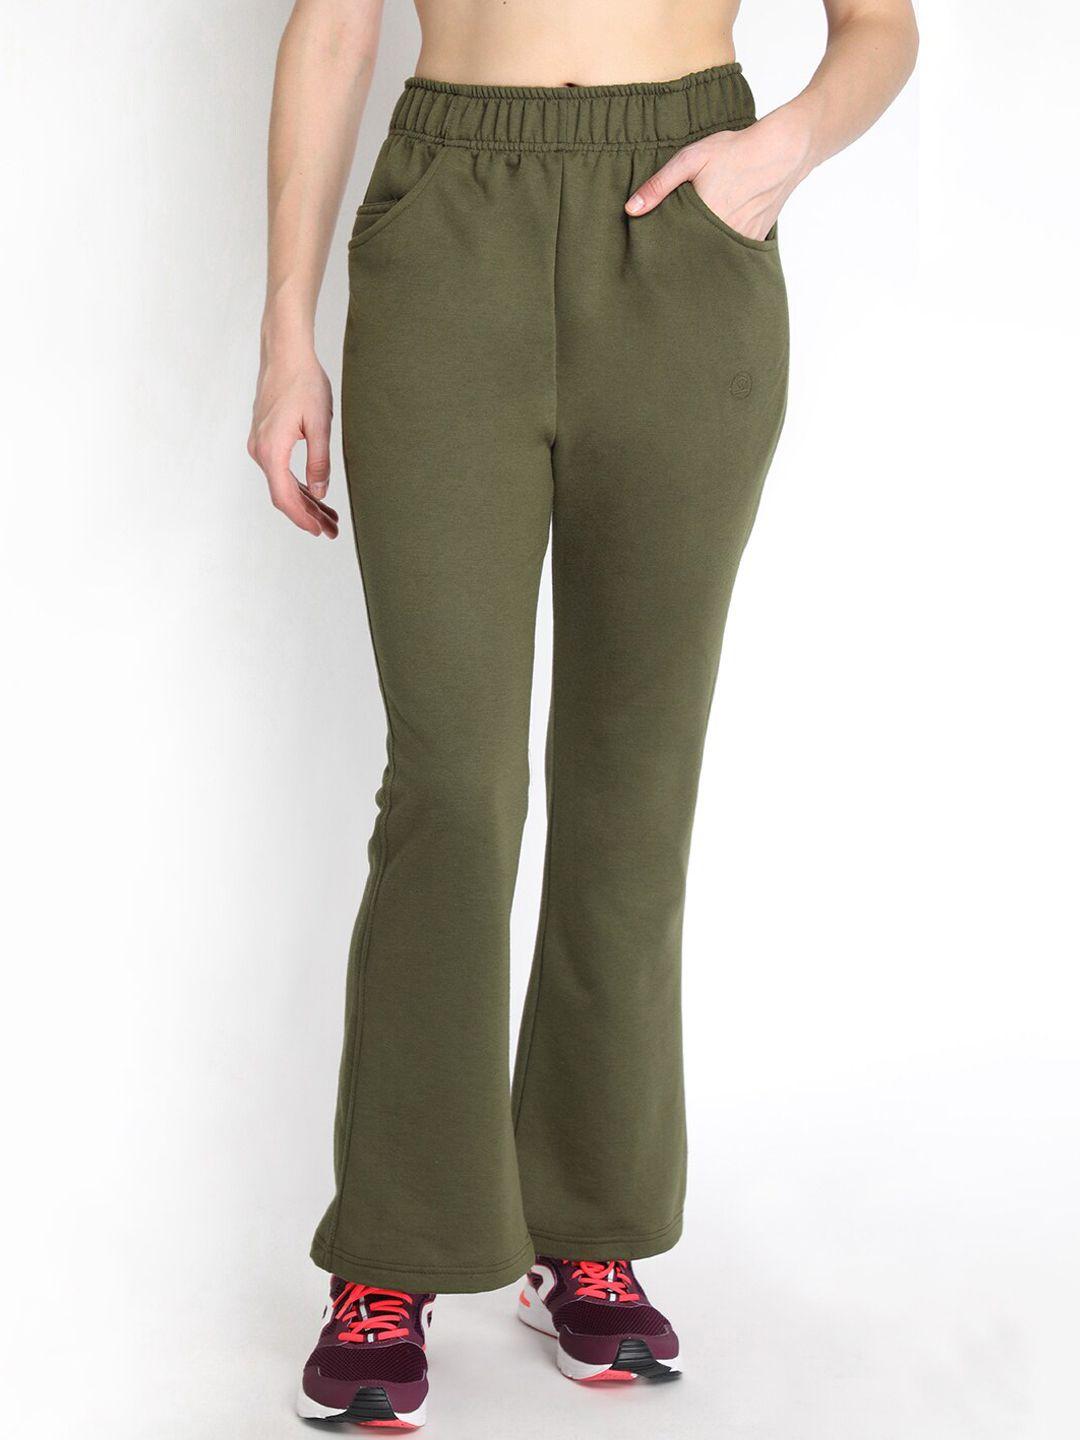 chkokko women olive green solid bootcut fit track pant